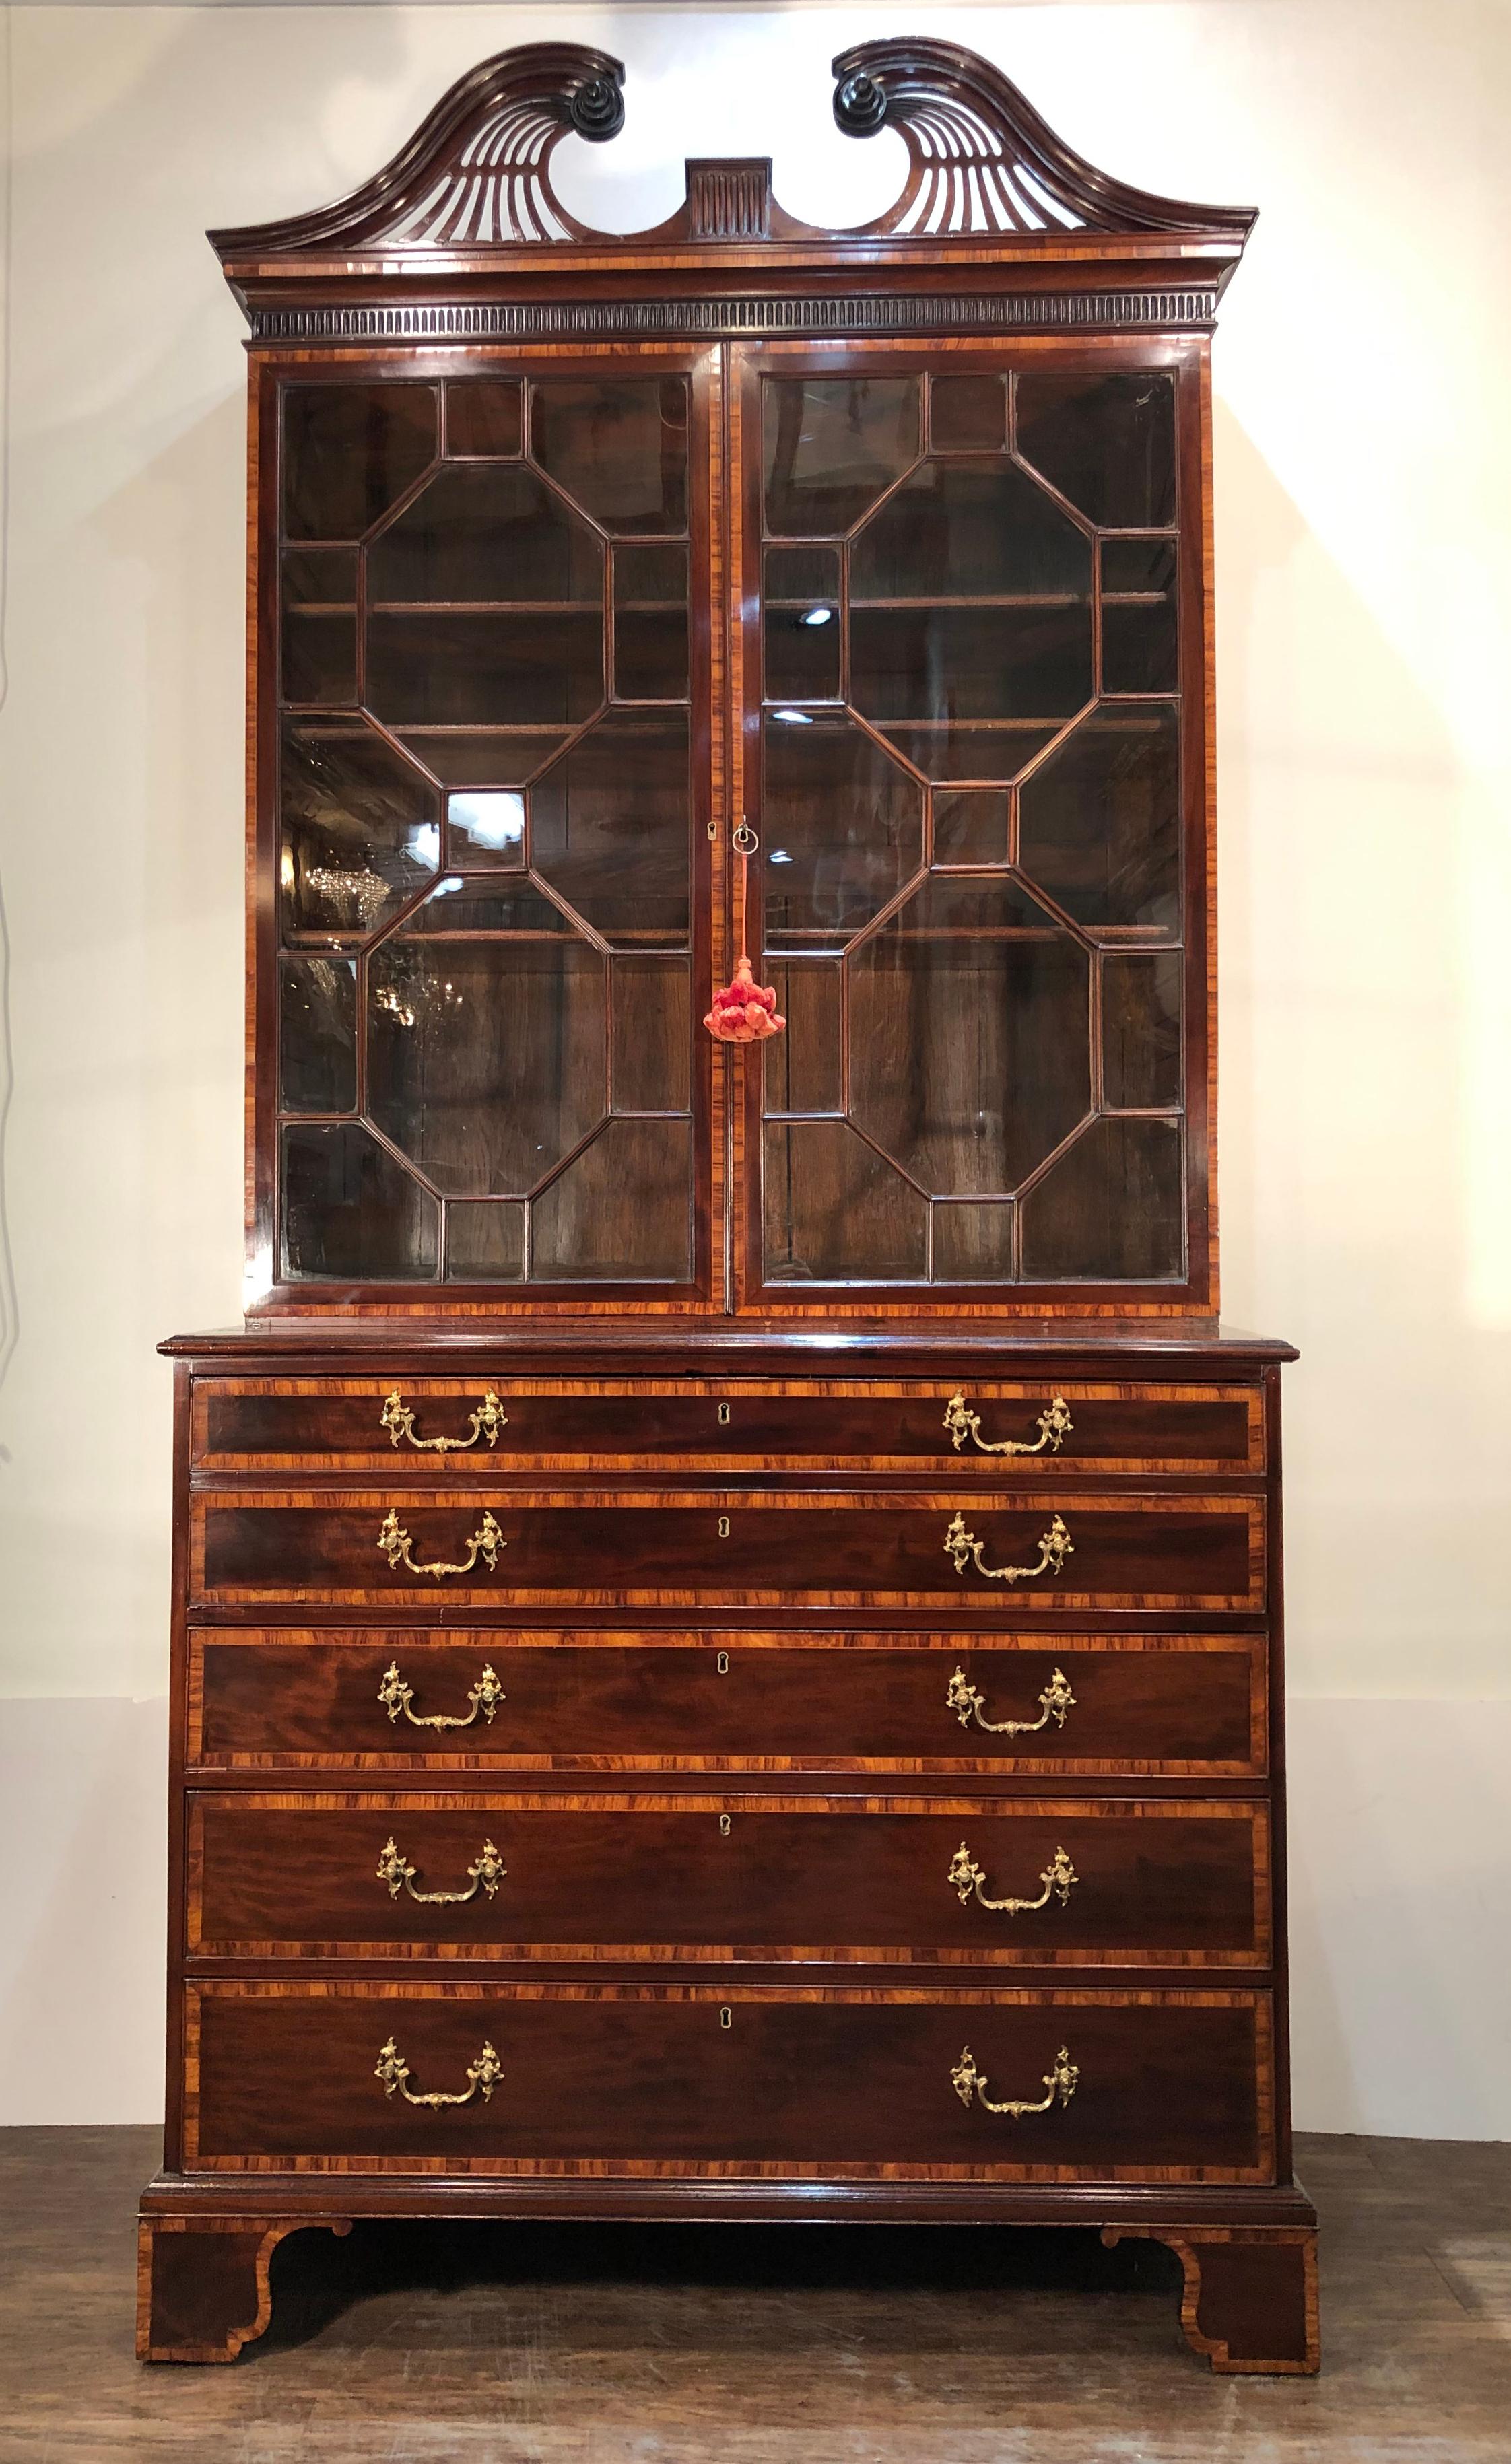 Extraordinary George III Mahogany Secretary or Bookcase, 18th century, in the manner of Henry Kettle. Pierced cornice with broken arch pediment finishing in scrolled rosettes with centralized stop fluting. The bookcase has a pair of glass doors